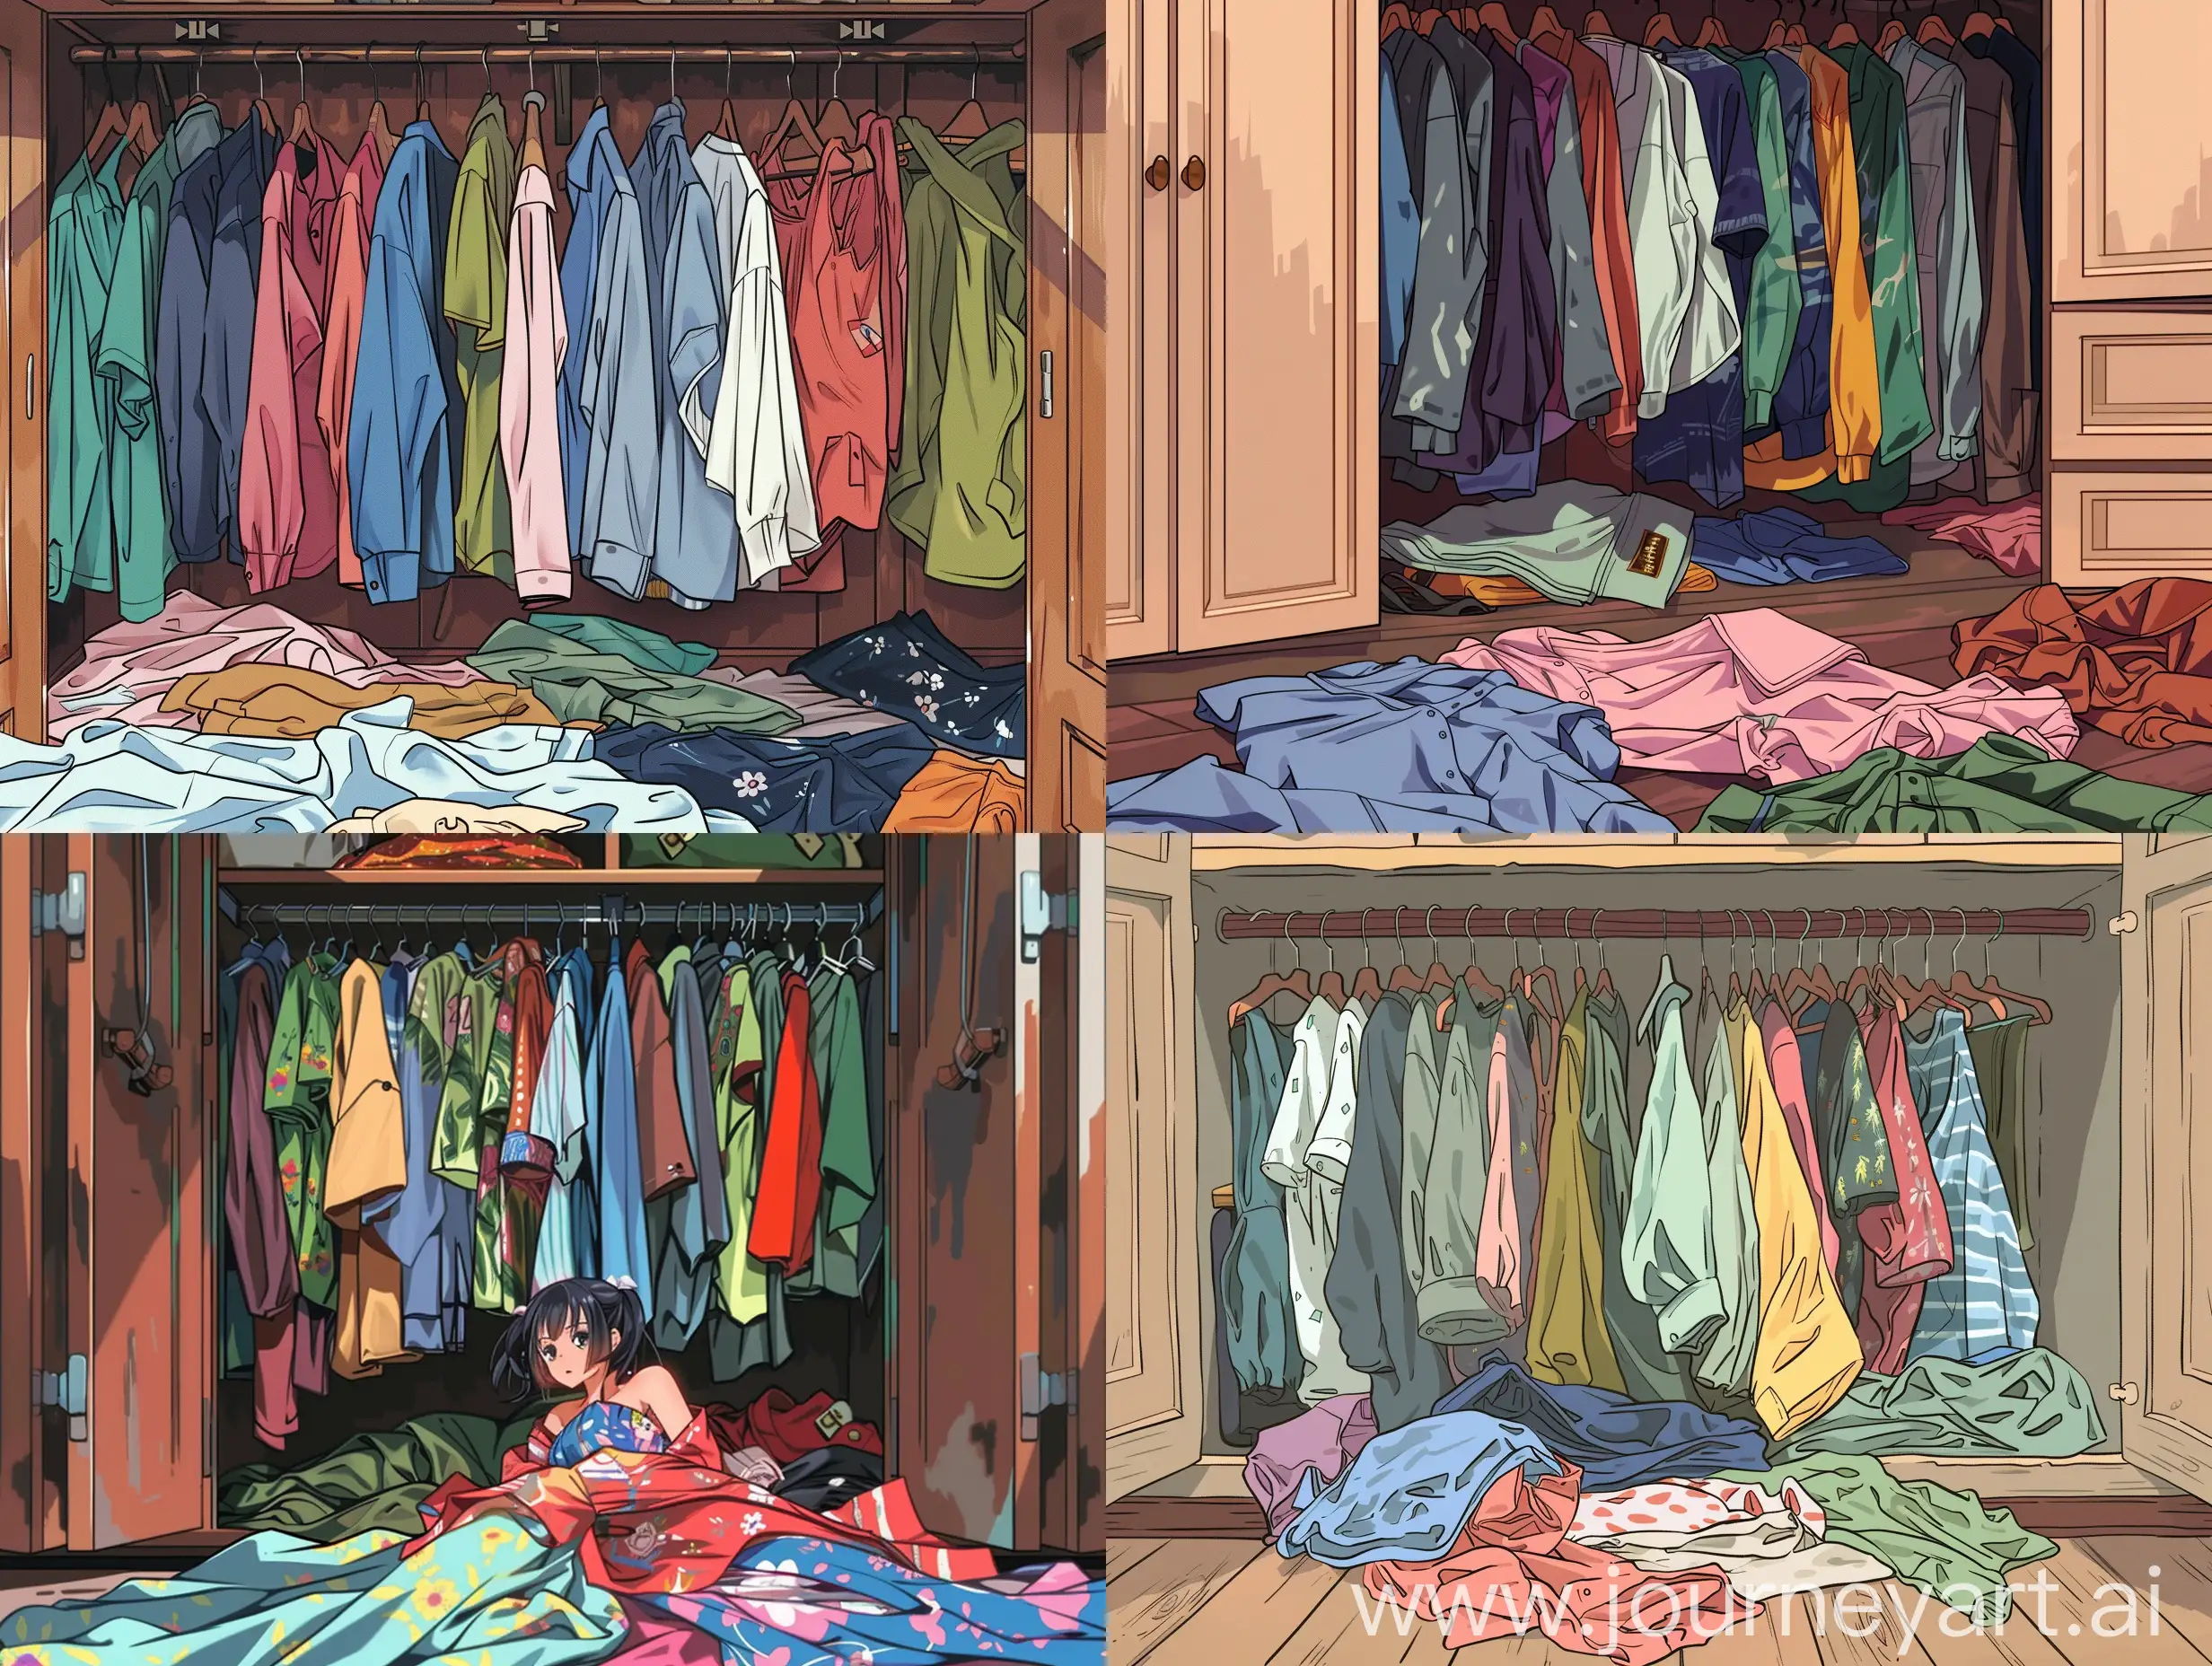 There are rumpled clothes in super anime style lying inside and below the closet